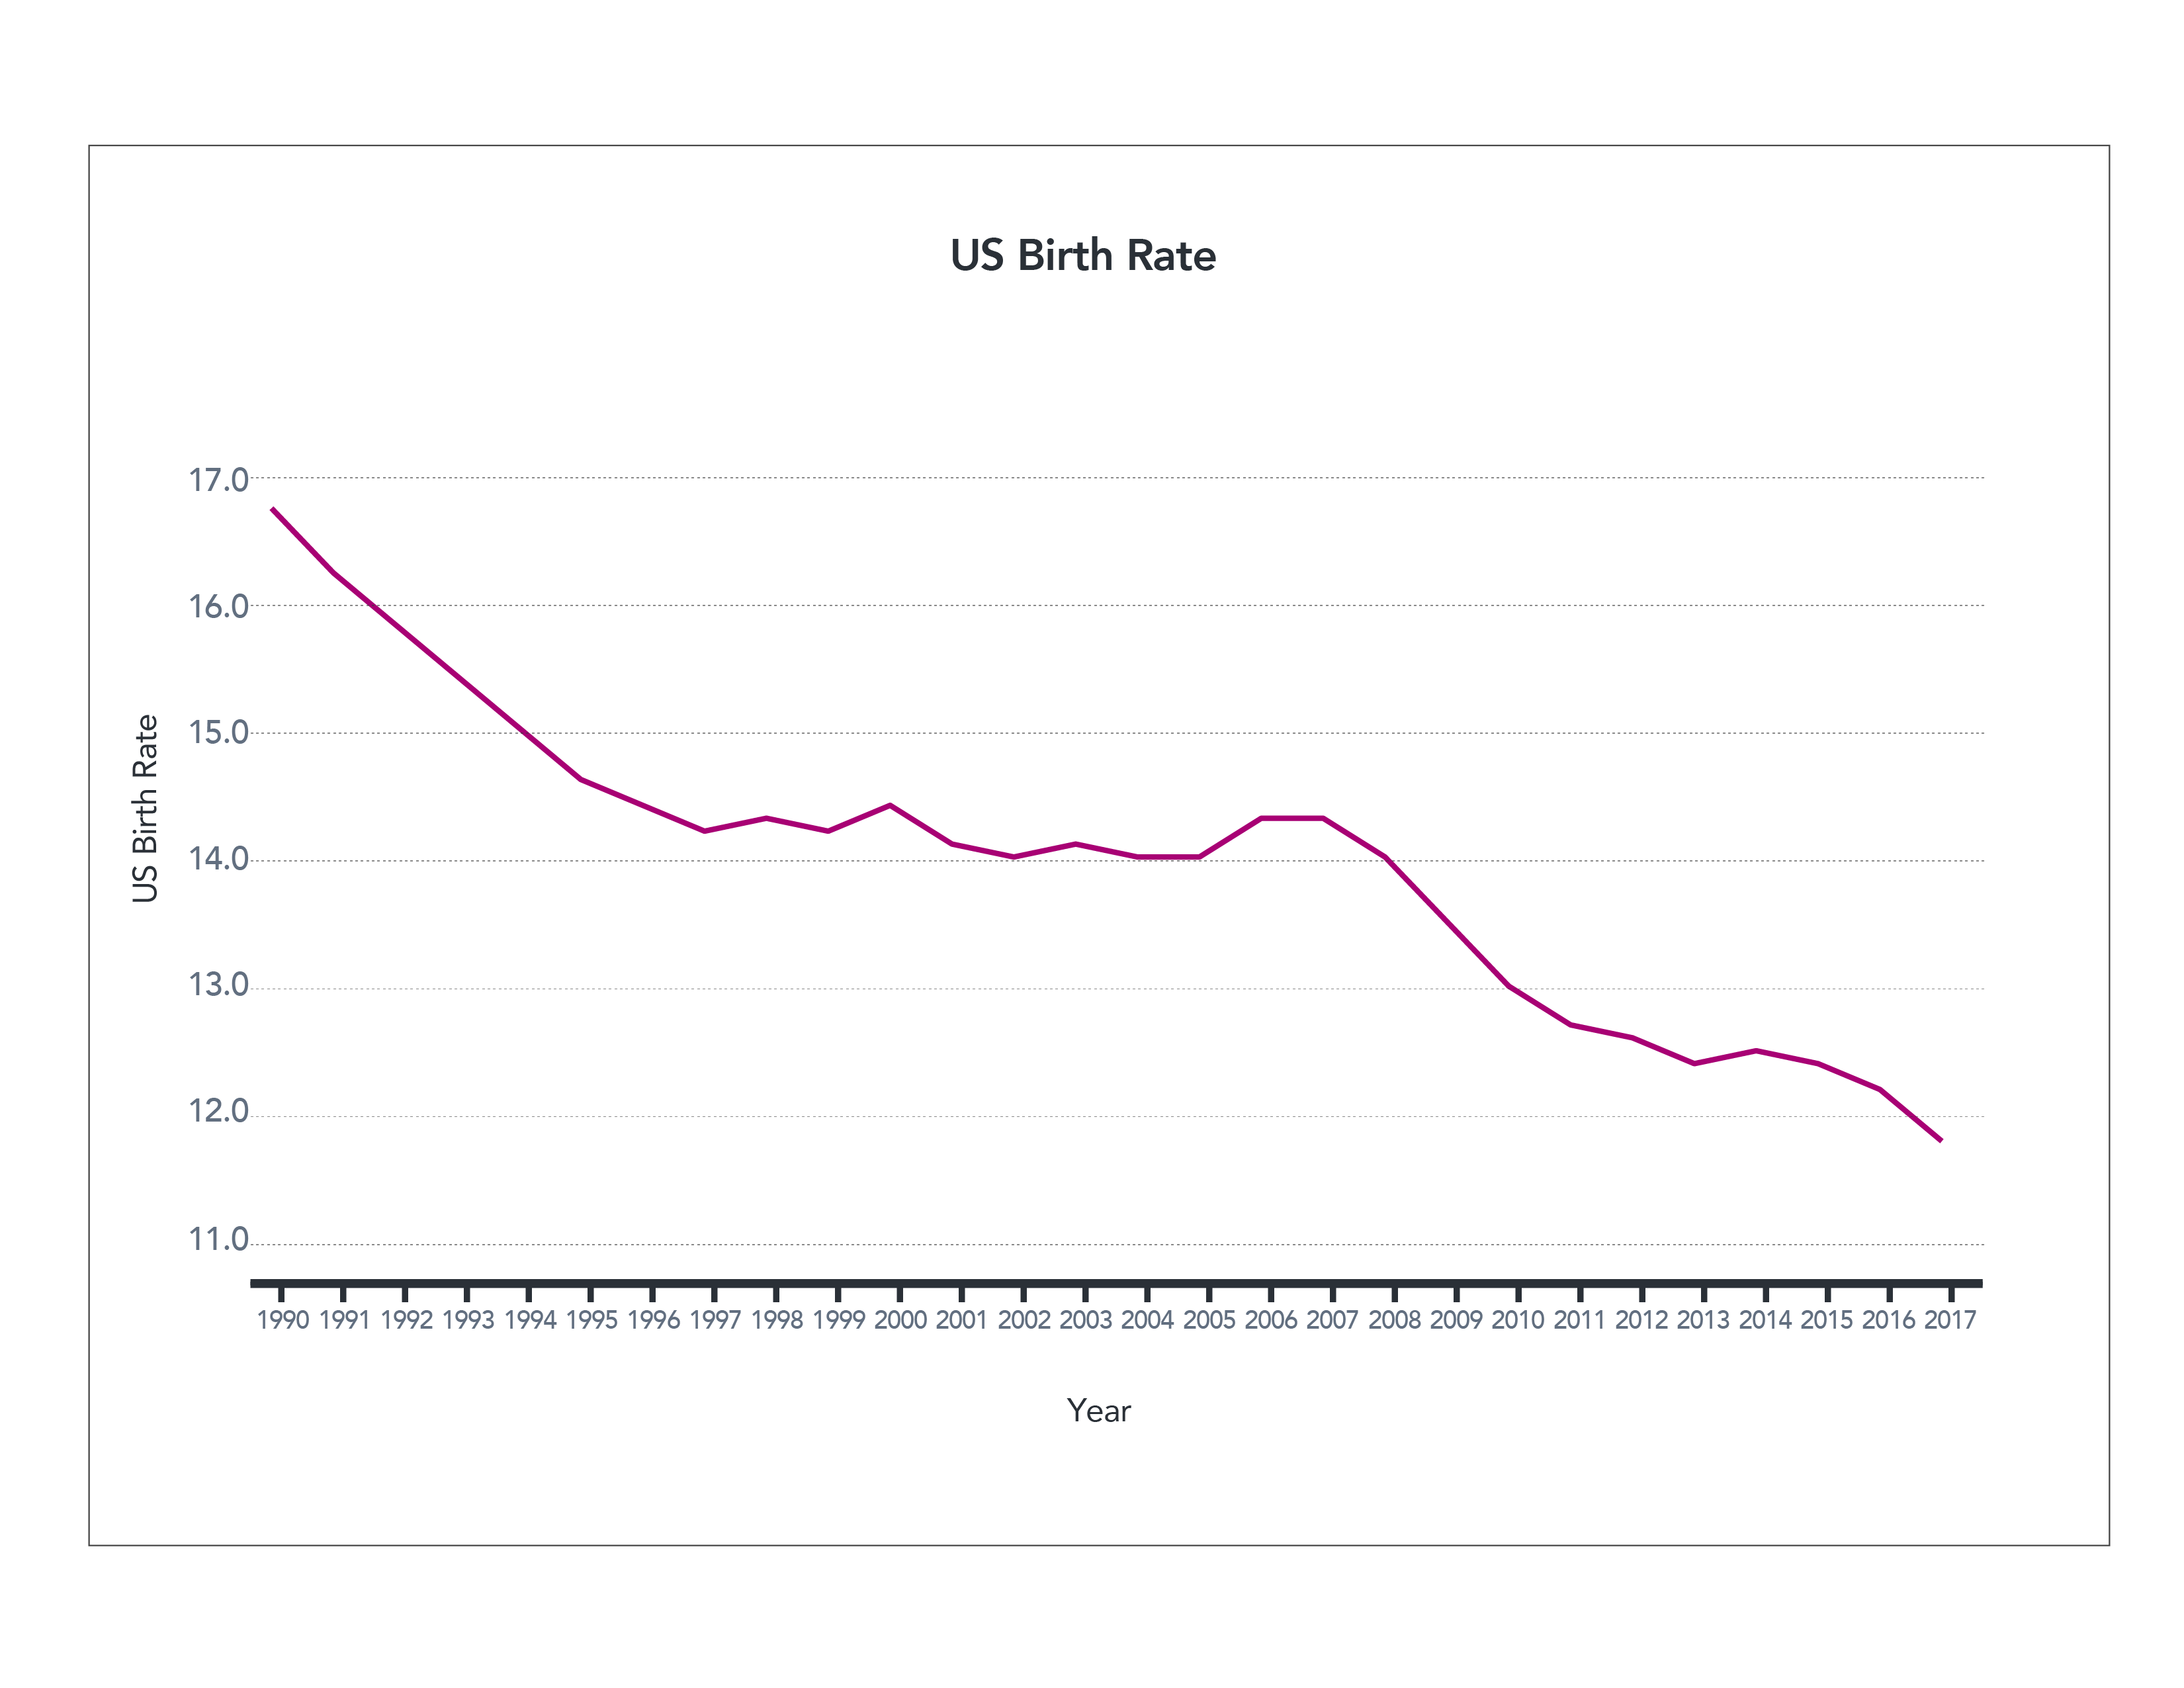 Figure 4. US Birth Rate (truncated axis)